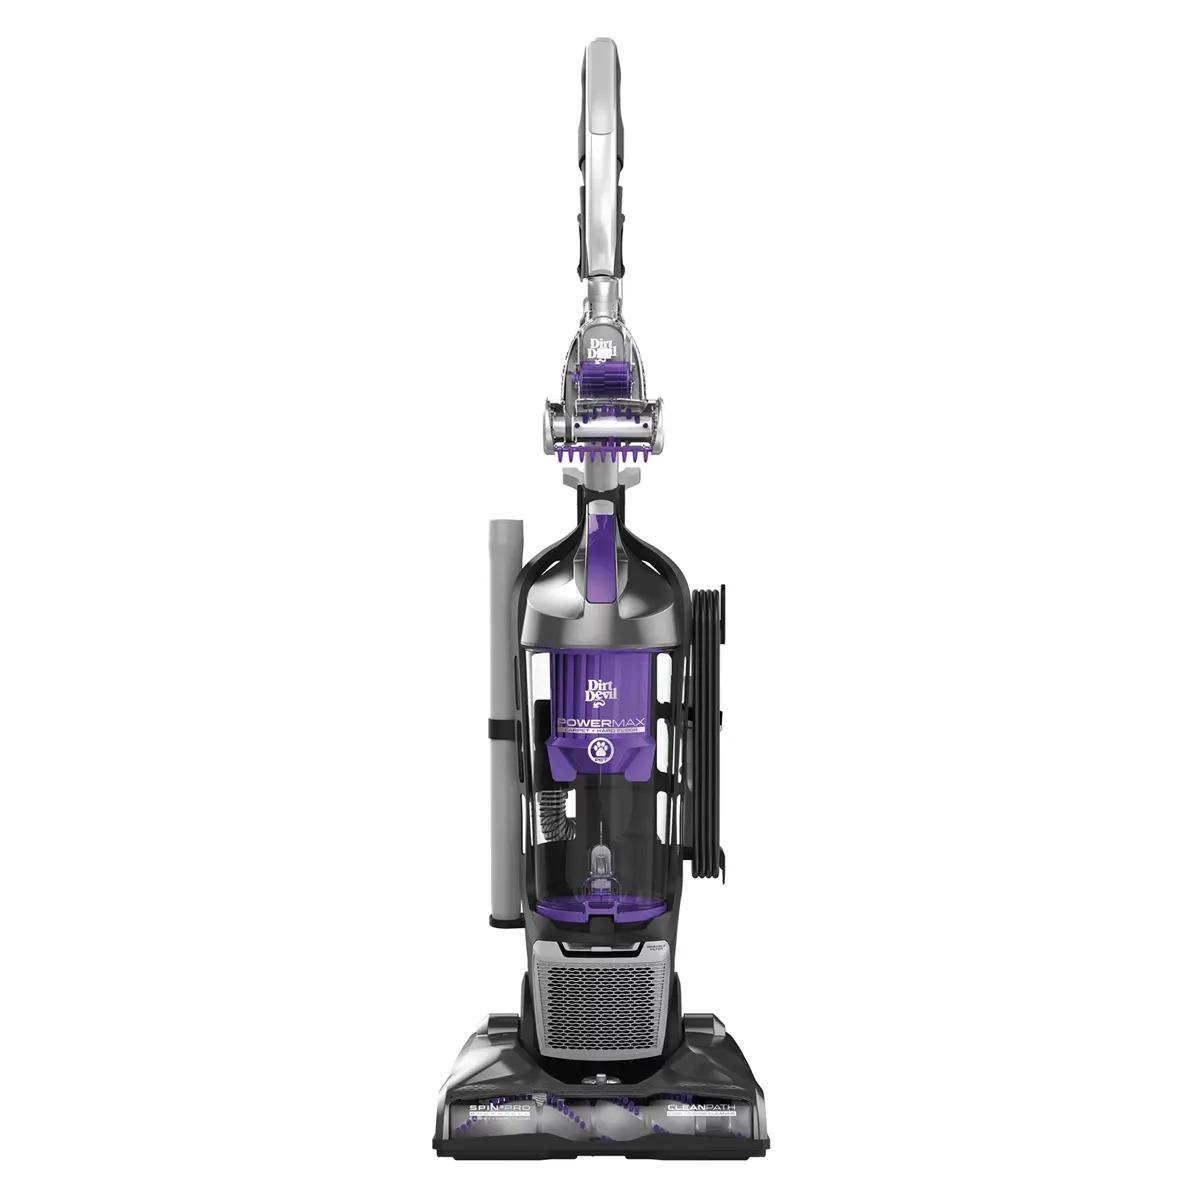 Dirt Devil Power Max Pet Upright Vacuum Cleaner for $49 Shipped